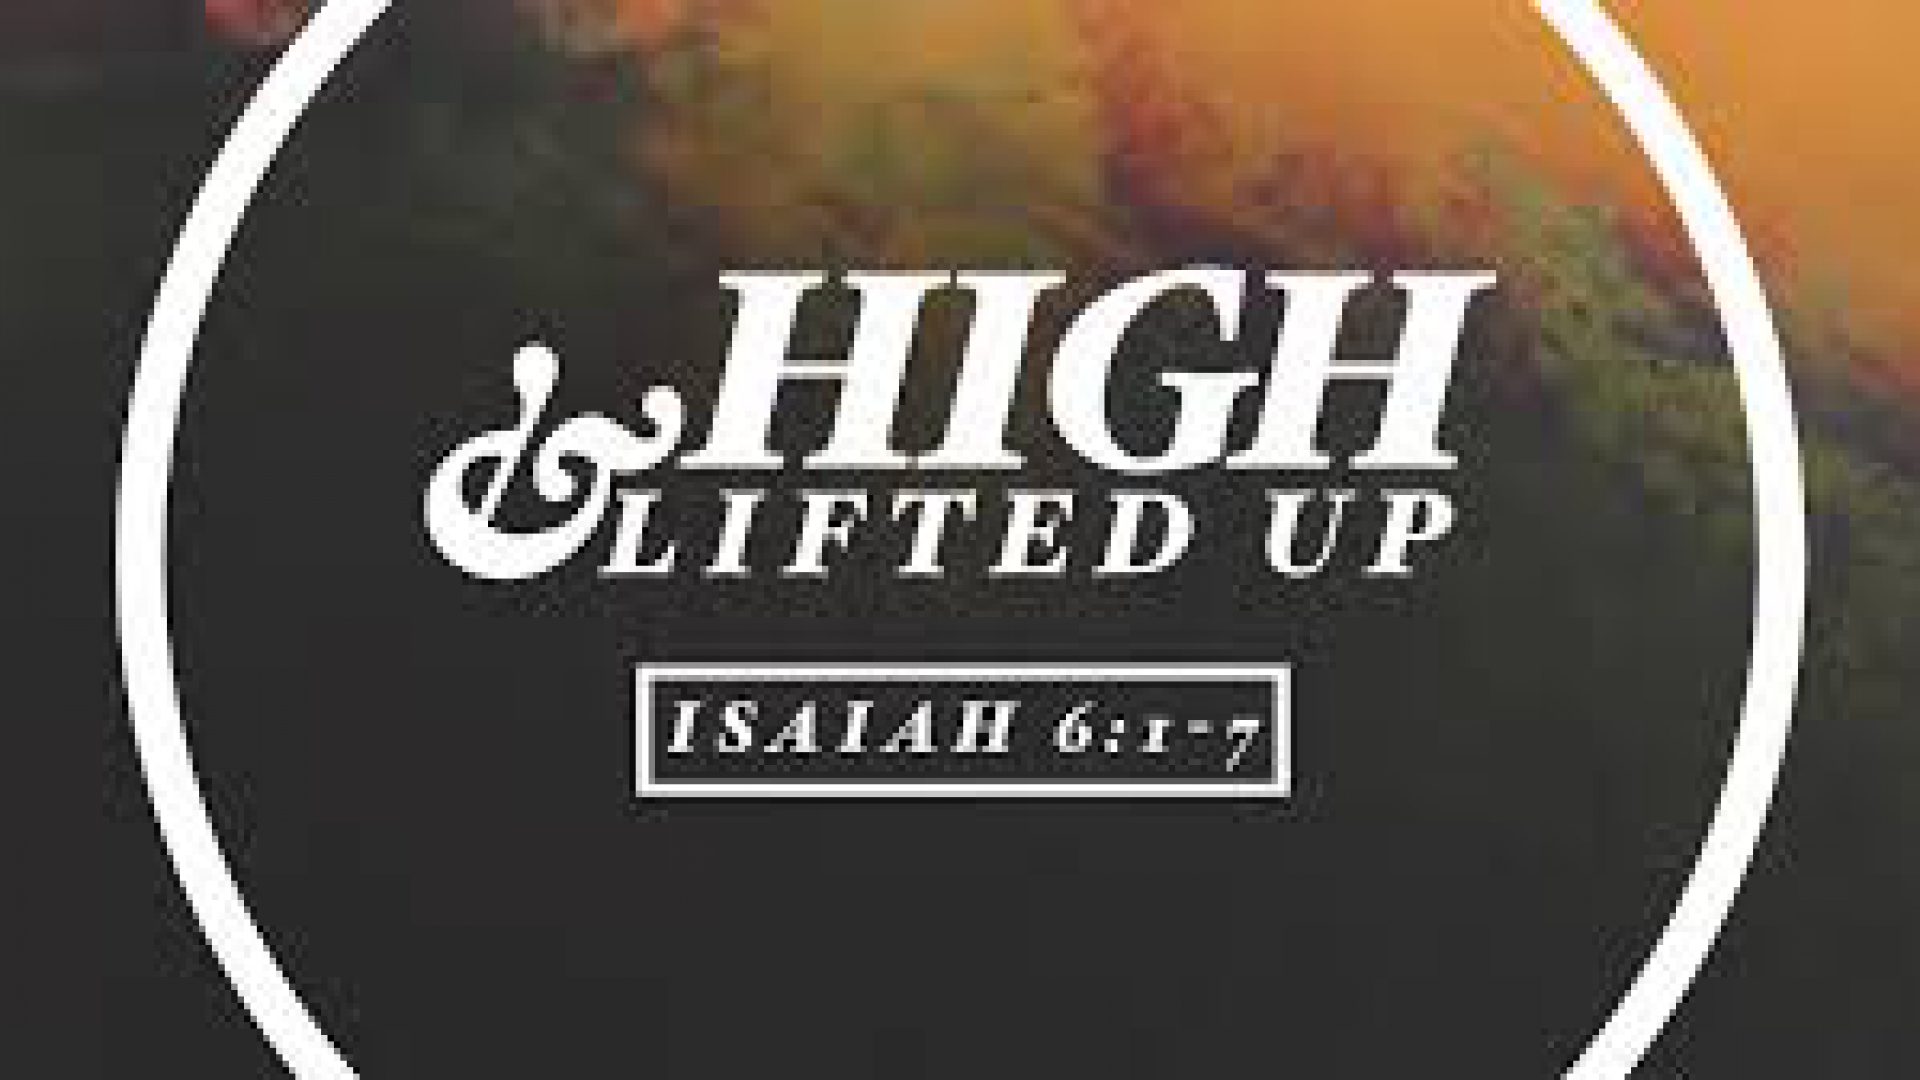 HIGH AND LIFTED UP